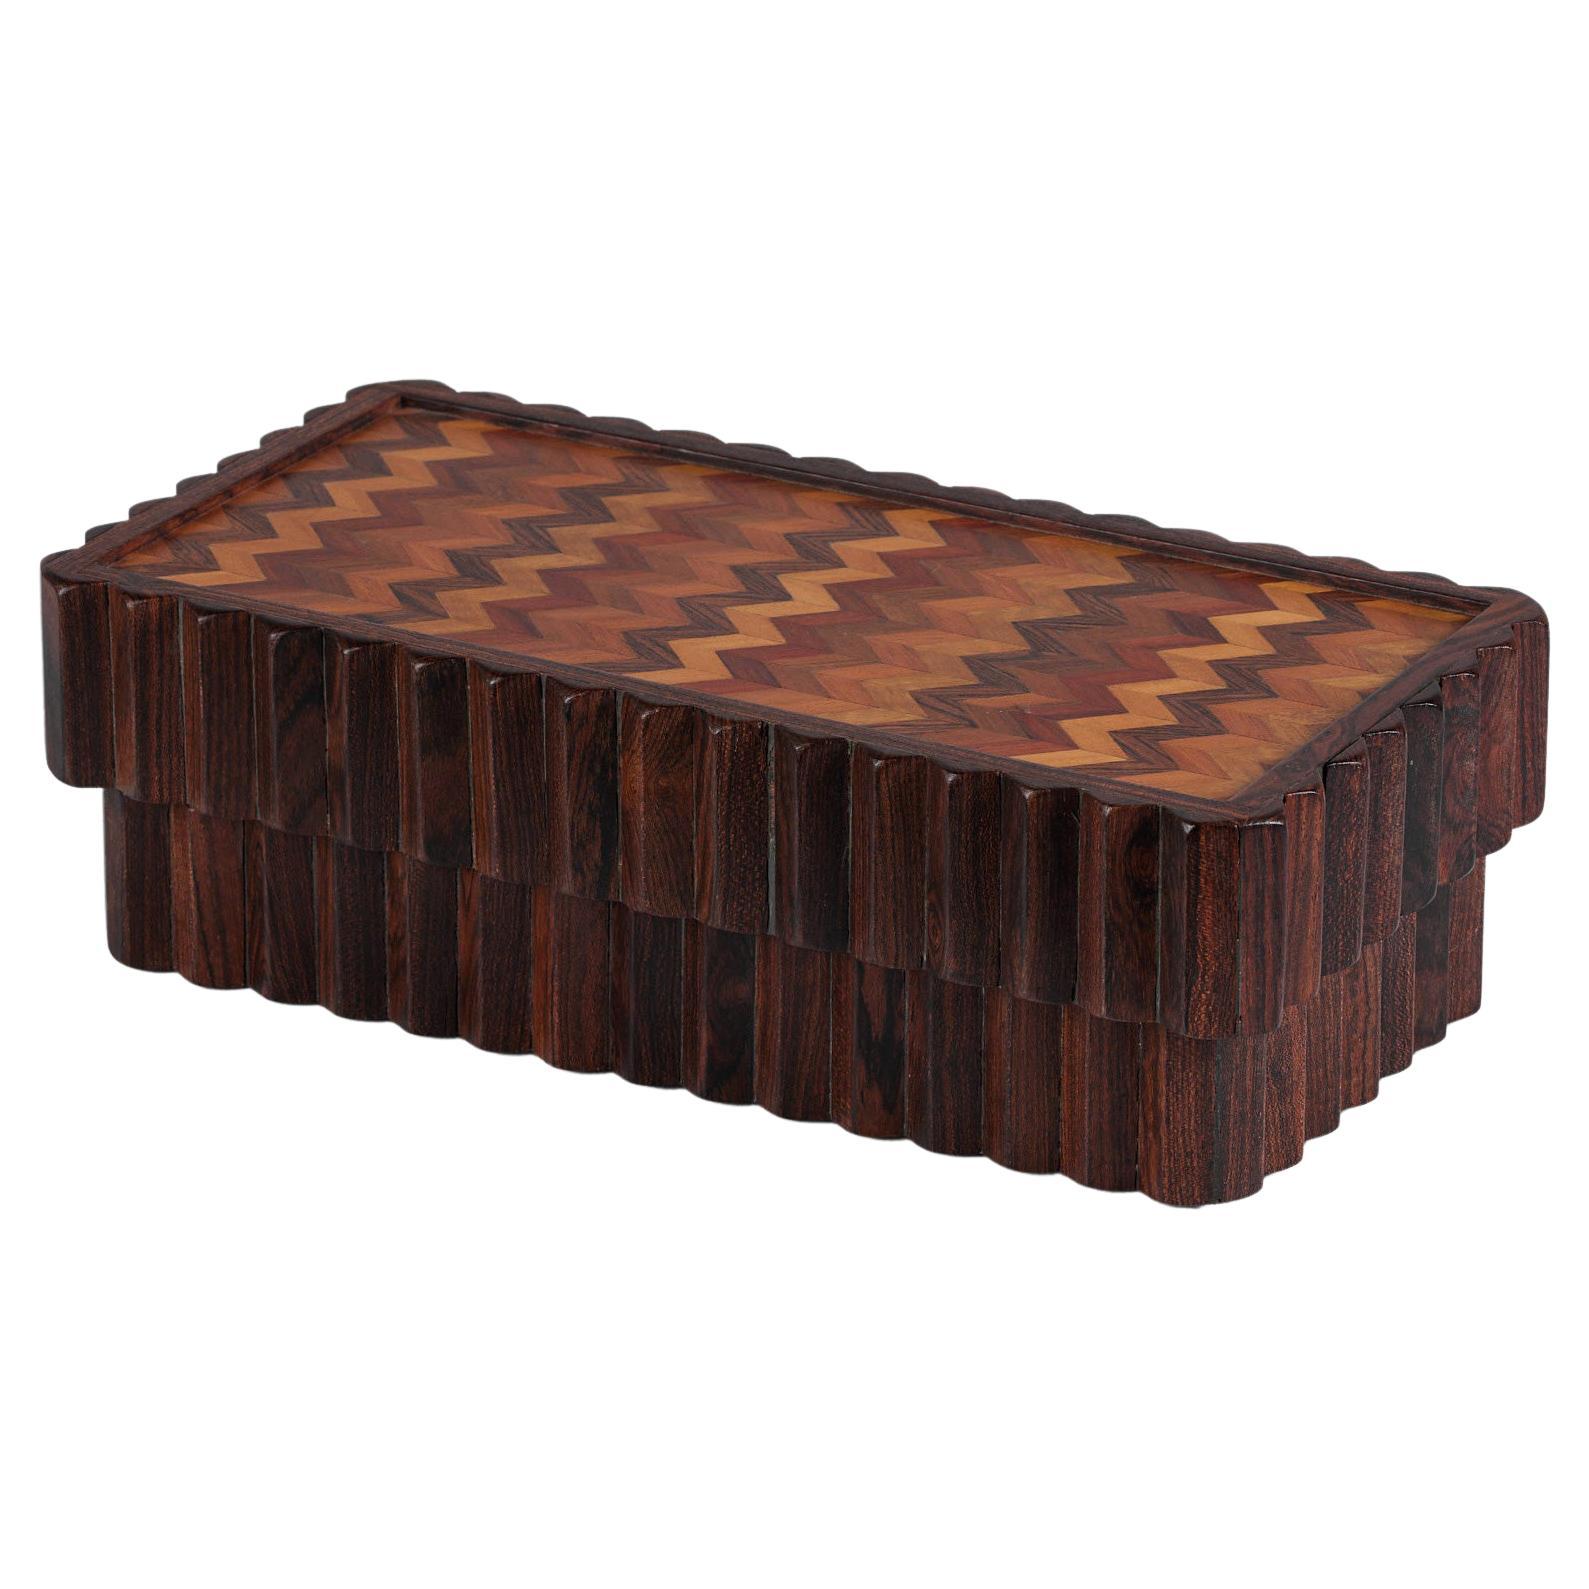 Don Shoemaker Large Marquetry Box with Scallop Trim for Senal